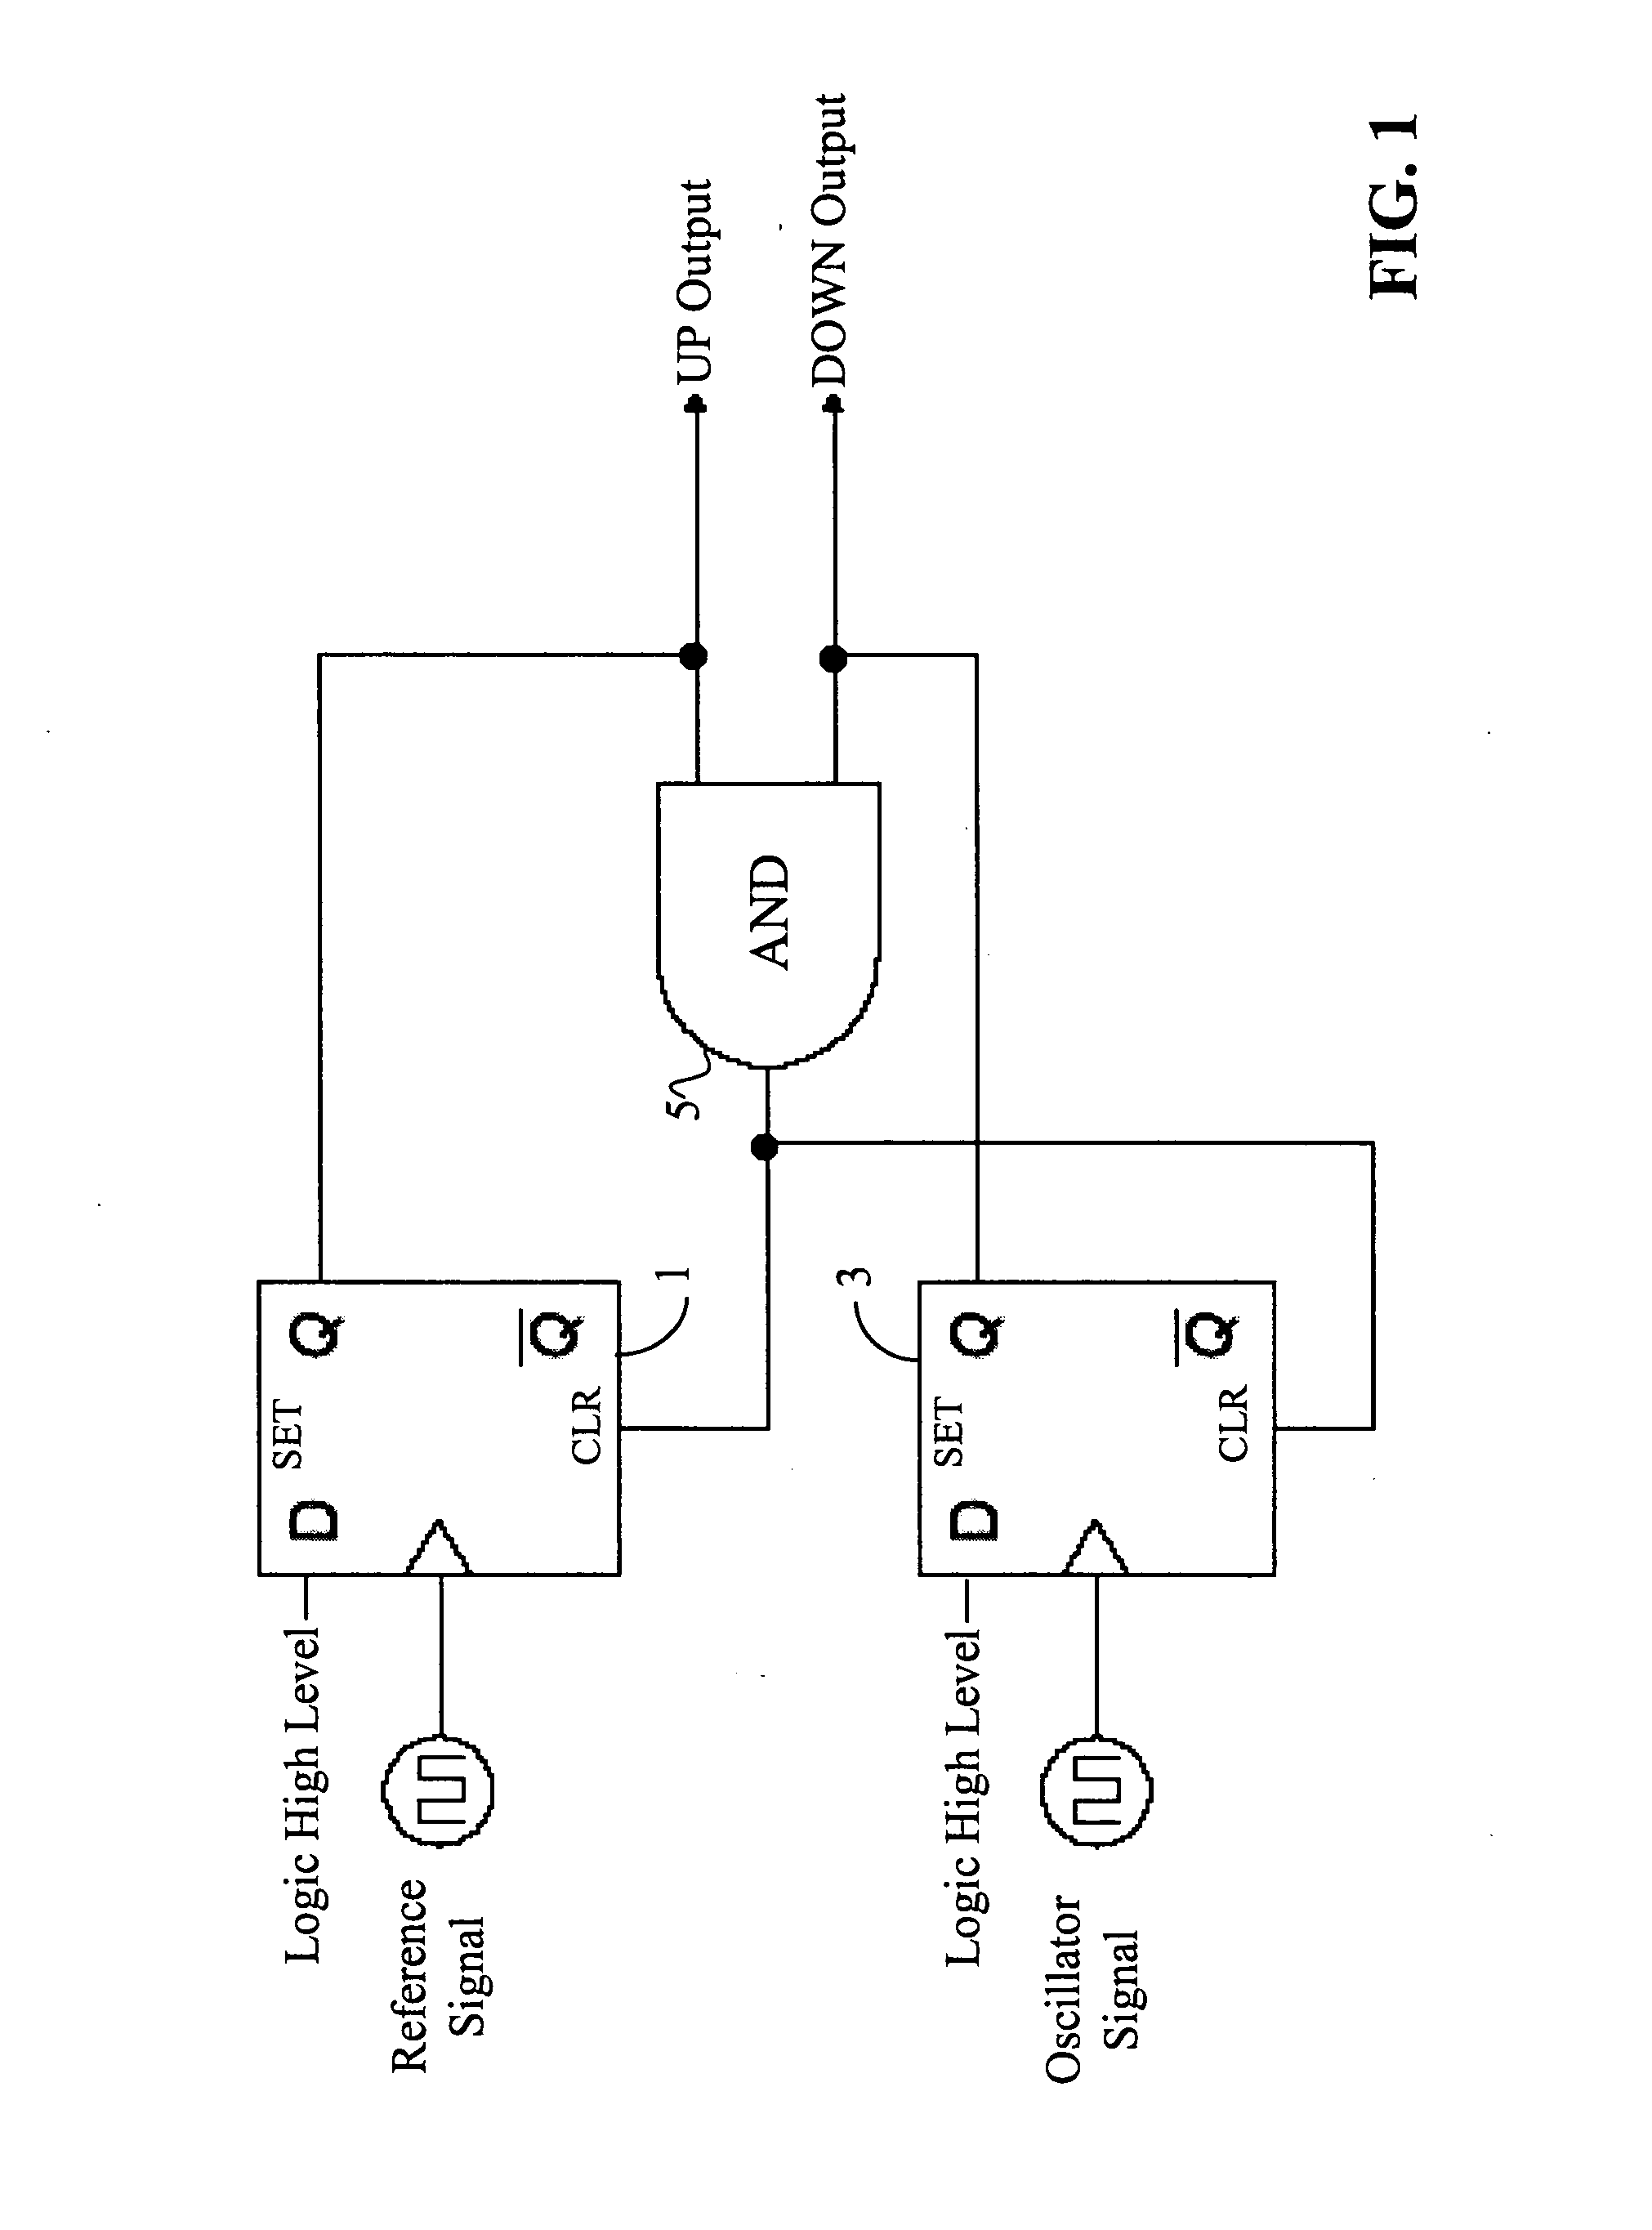 Differential current mode phase/frequency detector circuit